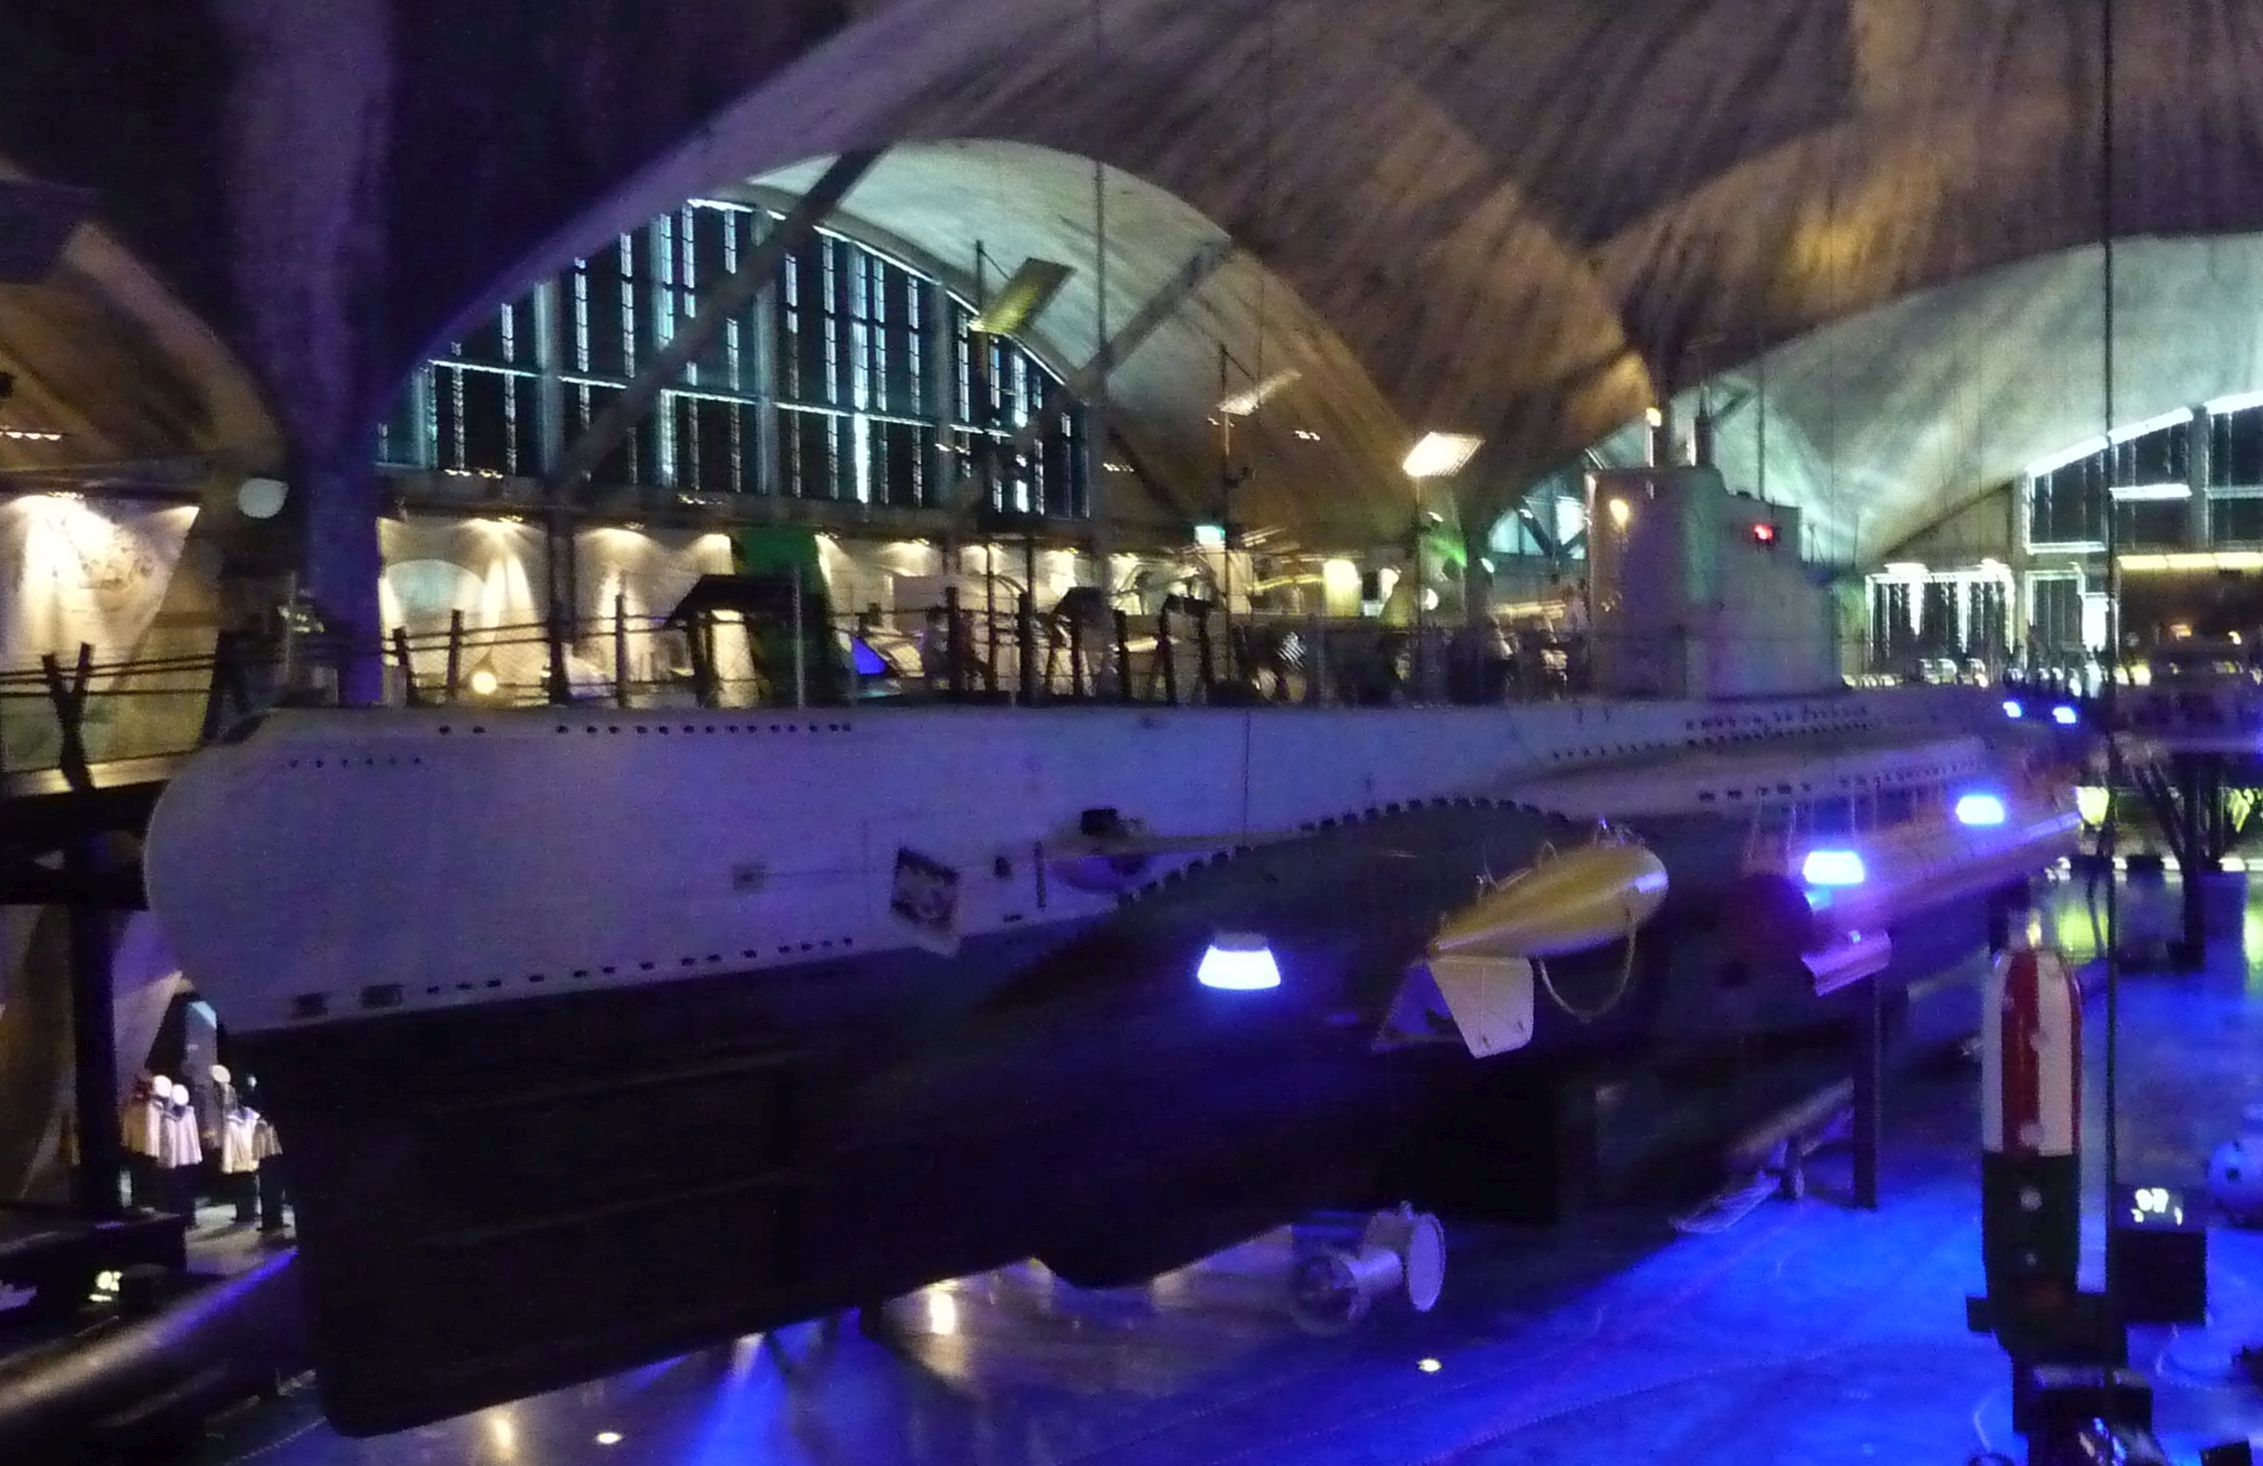 The submarine 'Lembit' in real life (in the museum) ...